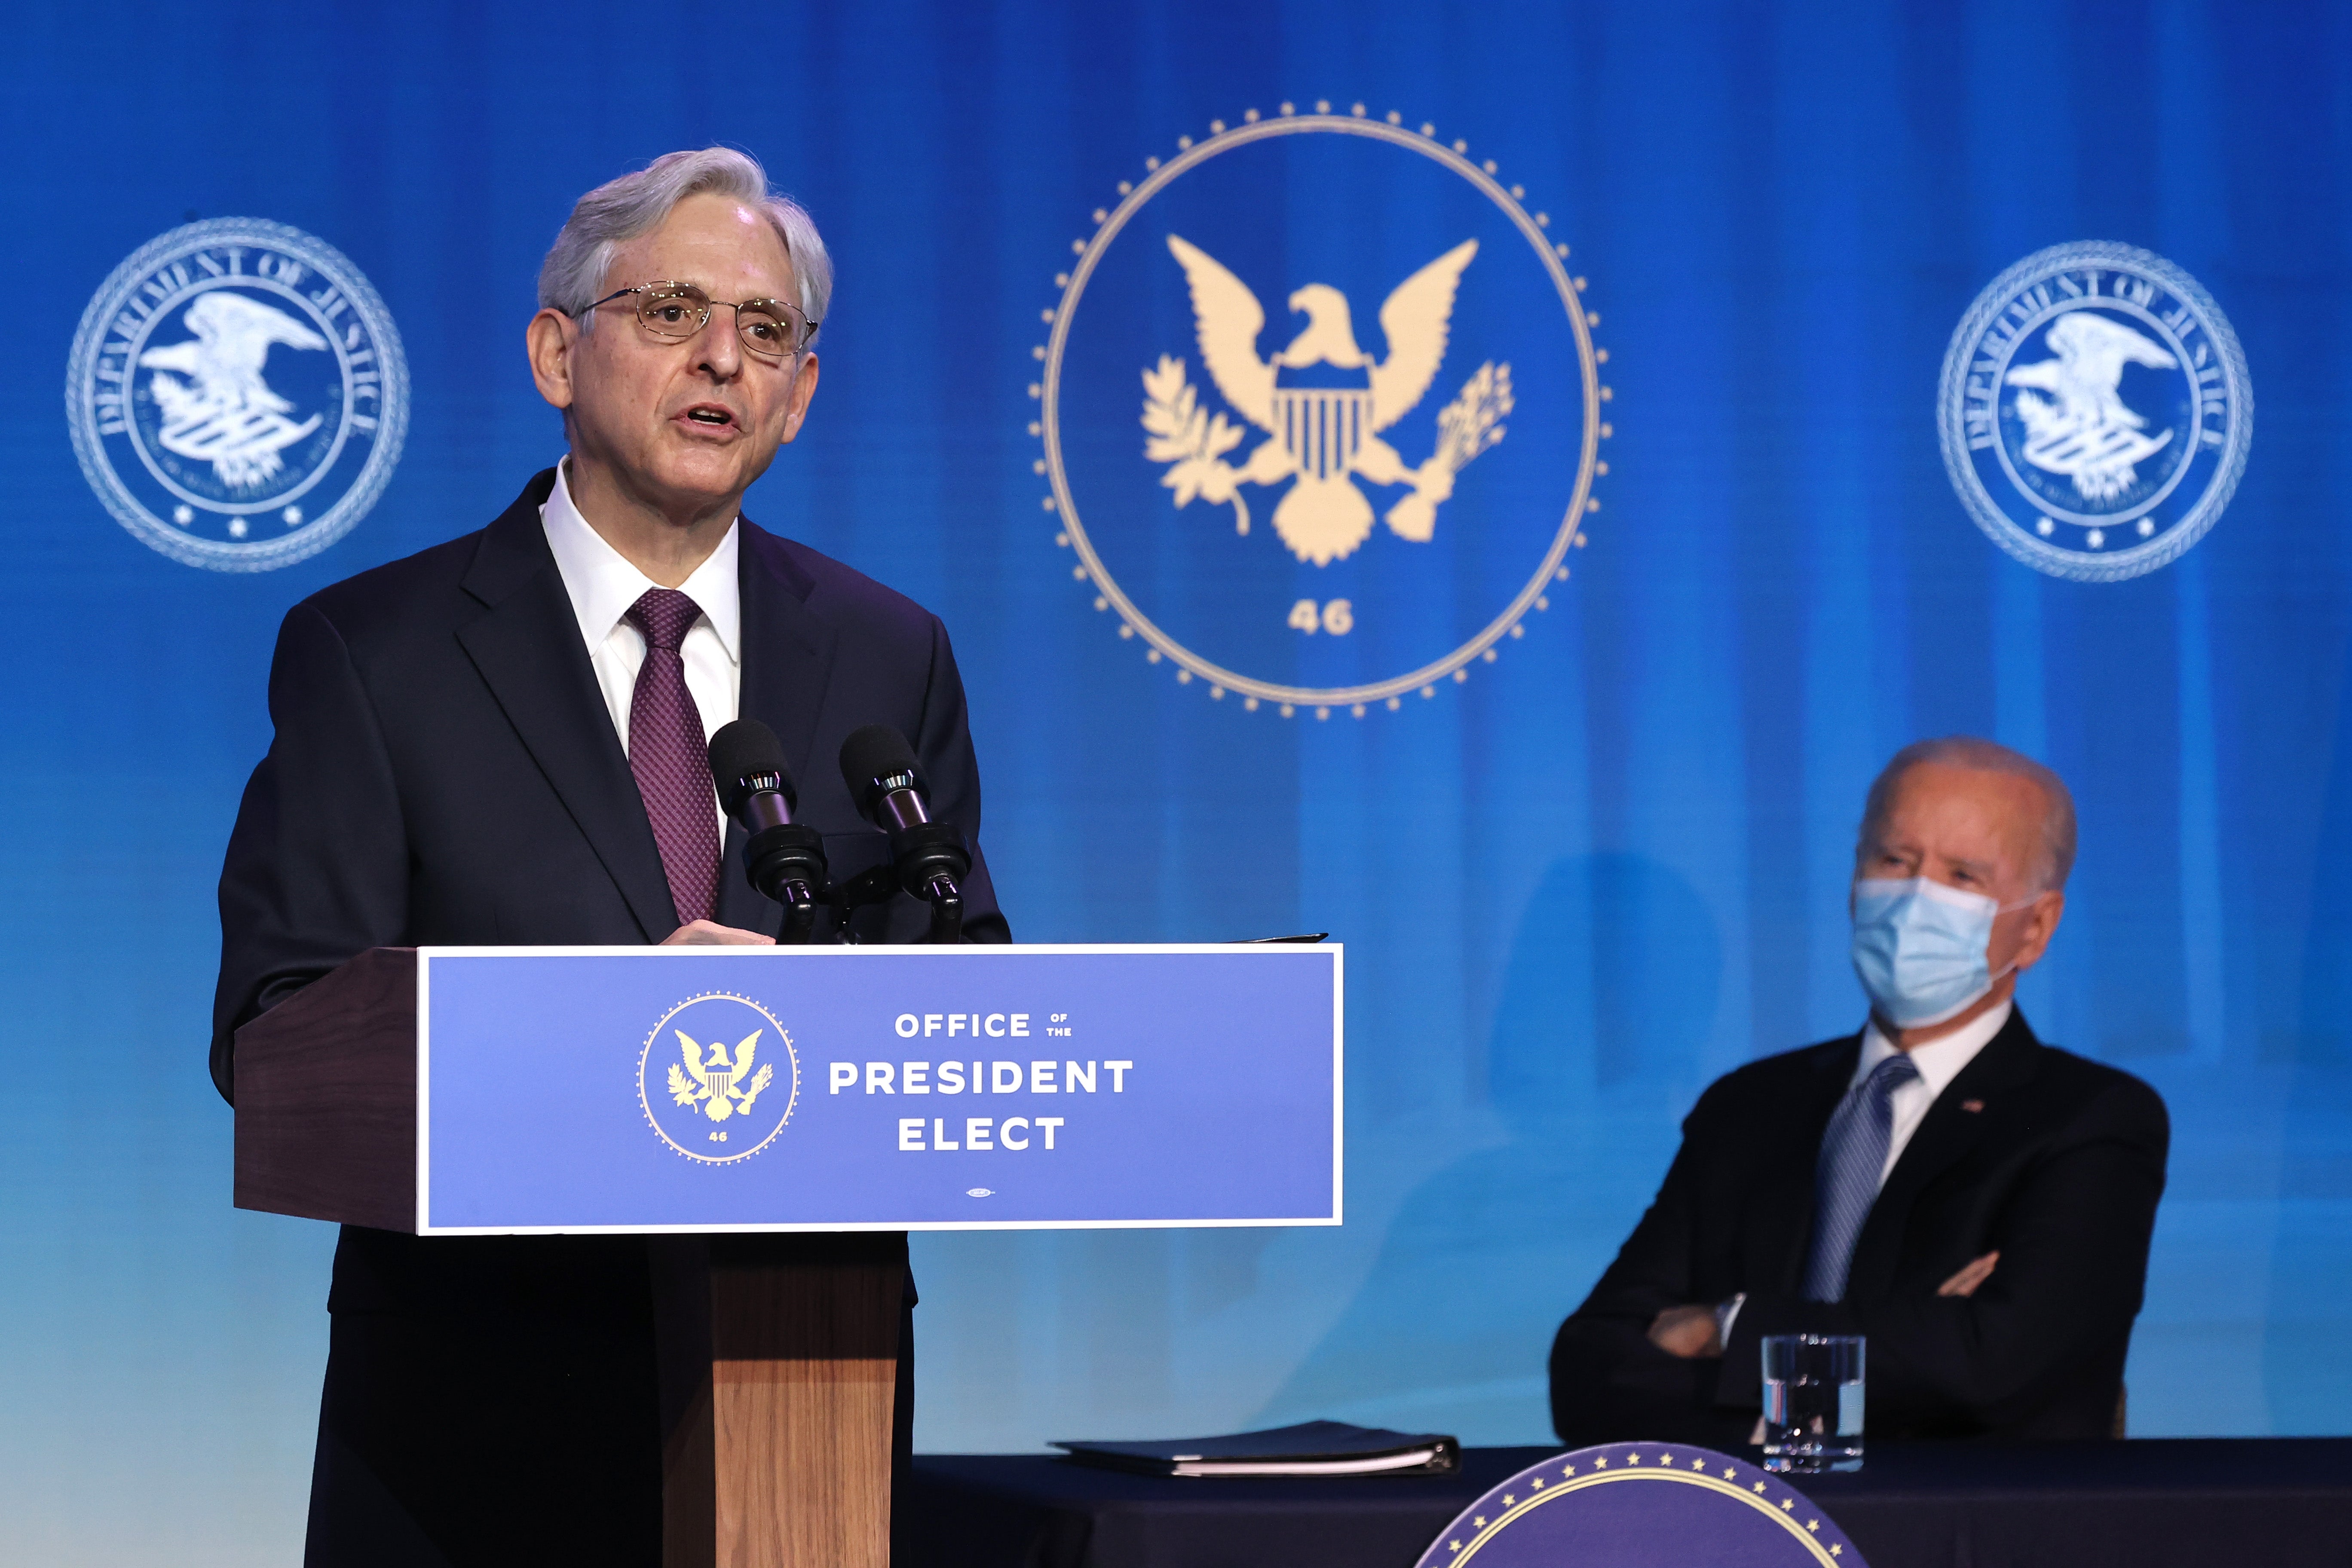 Merrick Garland vows to go after white supremacists as attorney general ahead of confirmation hearing